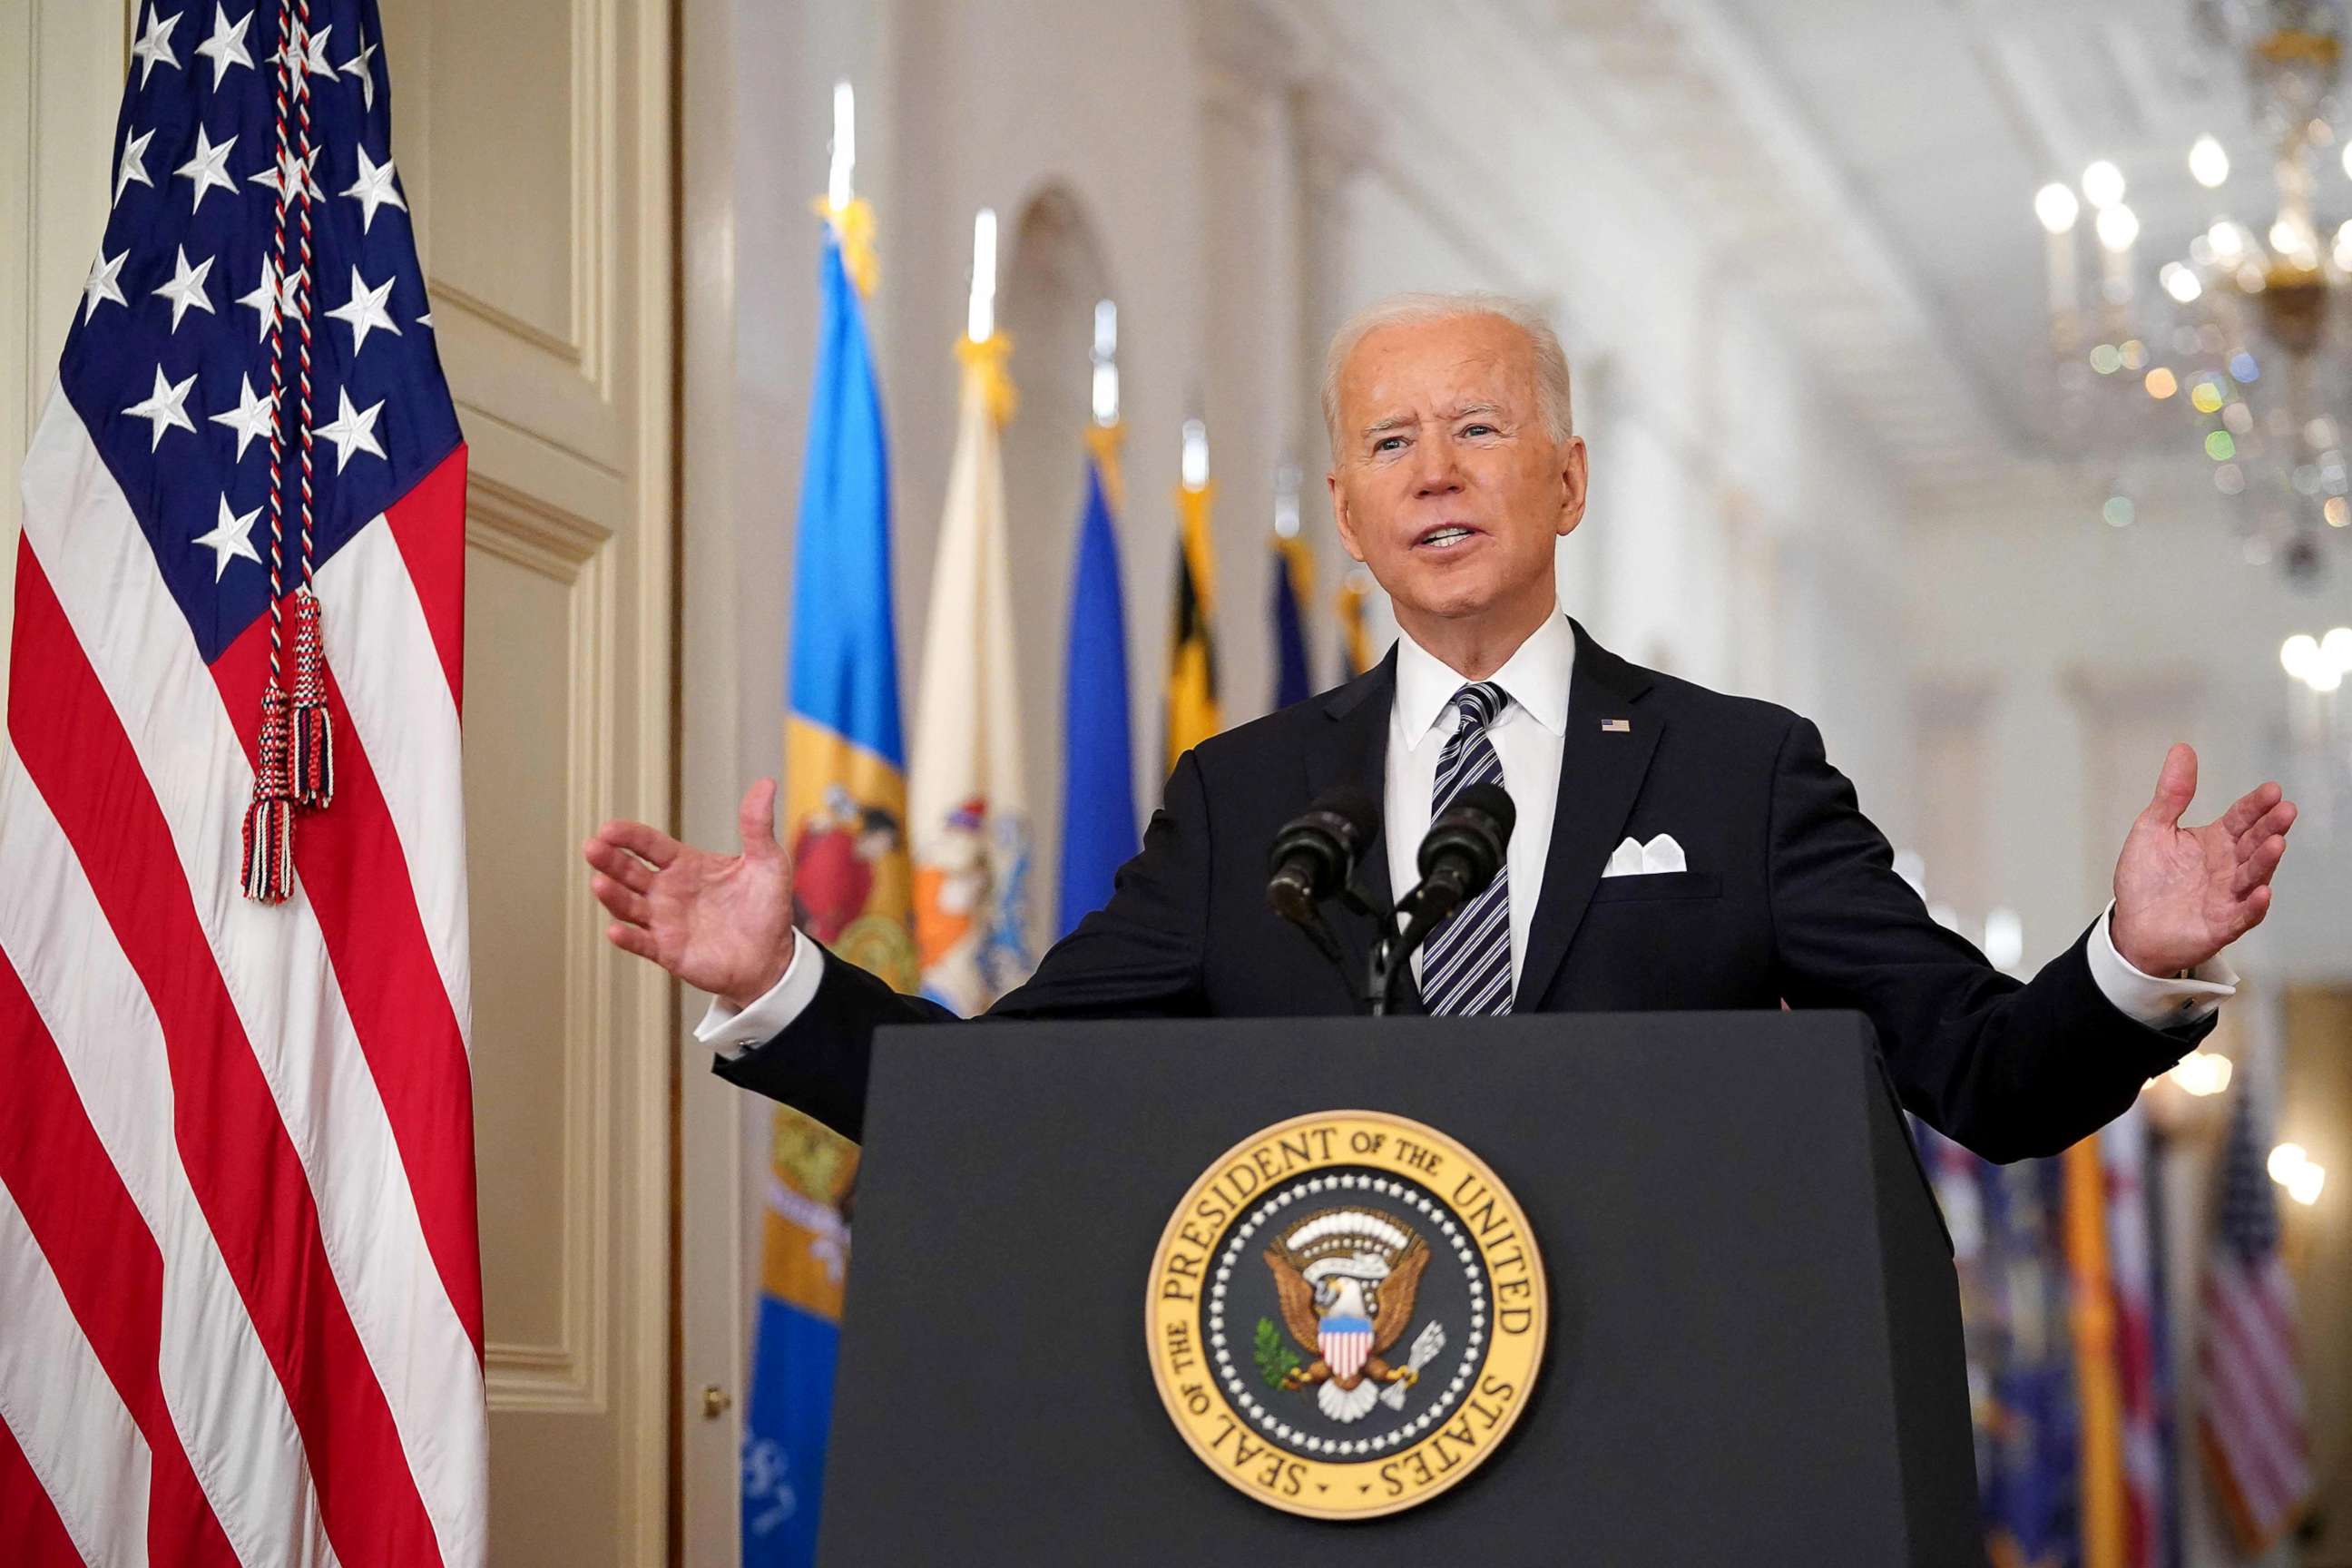 PHOTO:President Joe Biden gestures as he speaks on the anniversary of the start of the Covid-19 pandemic, in the East Room of the White House in Washington, DC on March 11, 2021. 